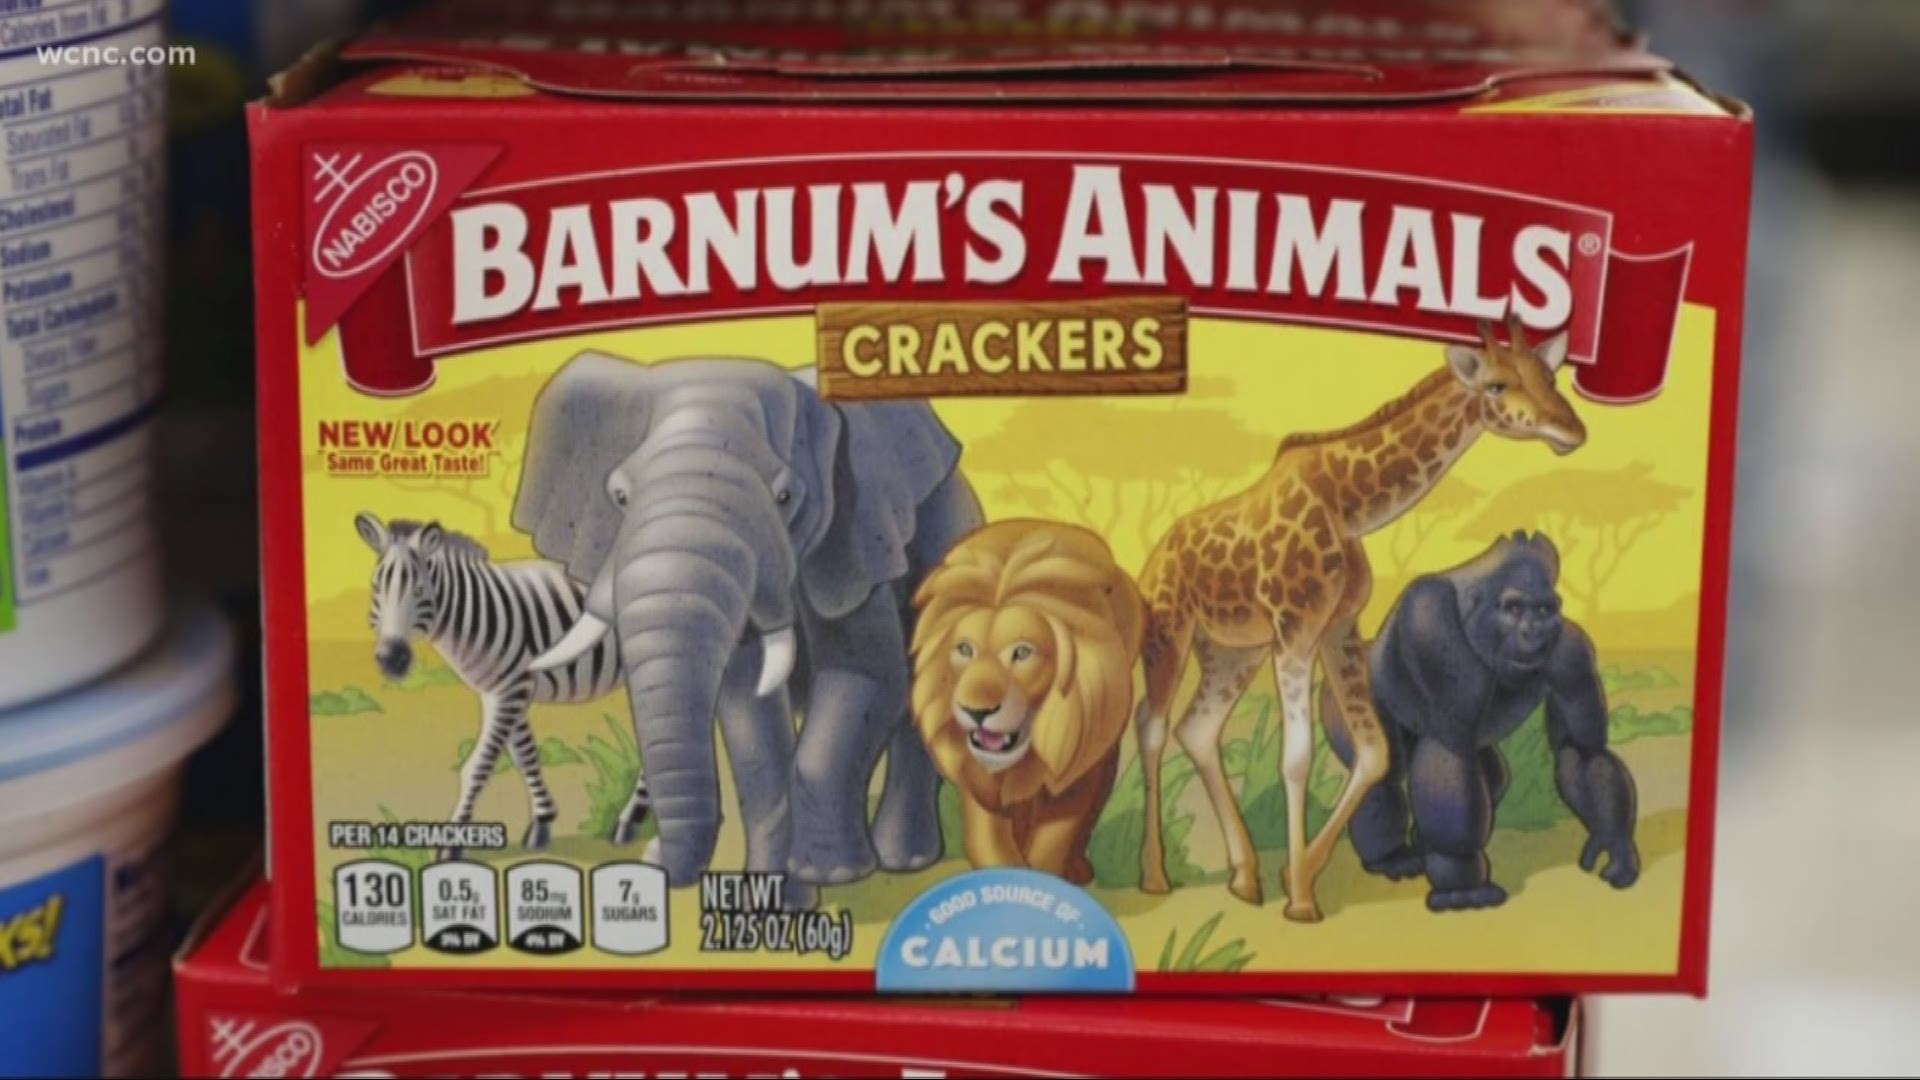 For the time ever, the classic Nabisco snack Barnum's Animal Crackers is taking the cages off the box.